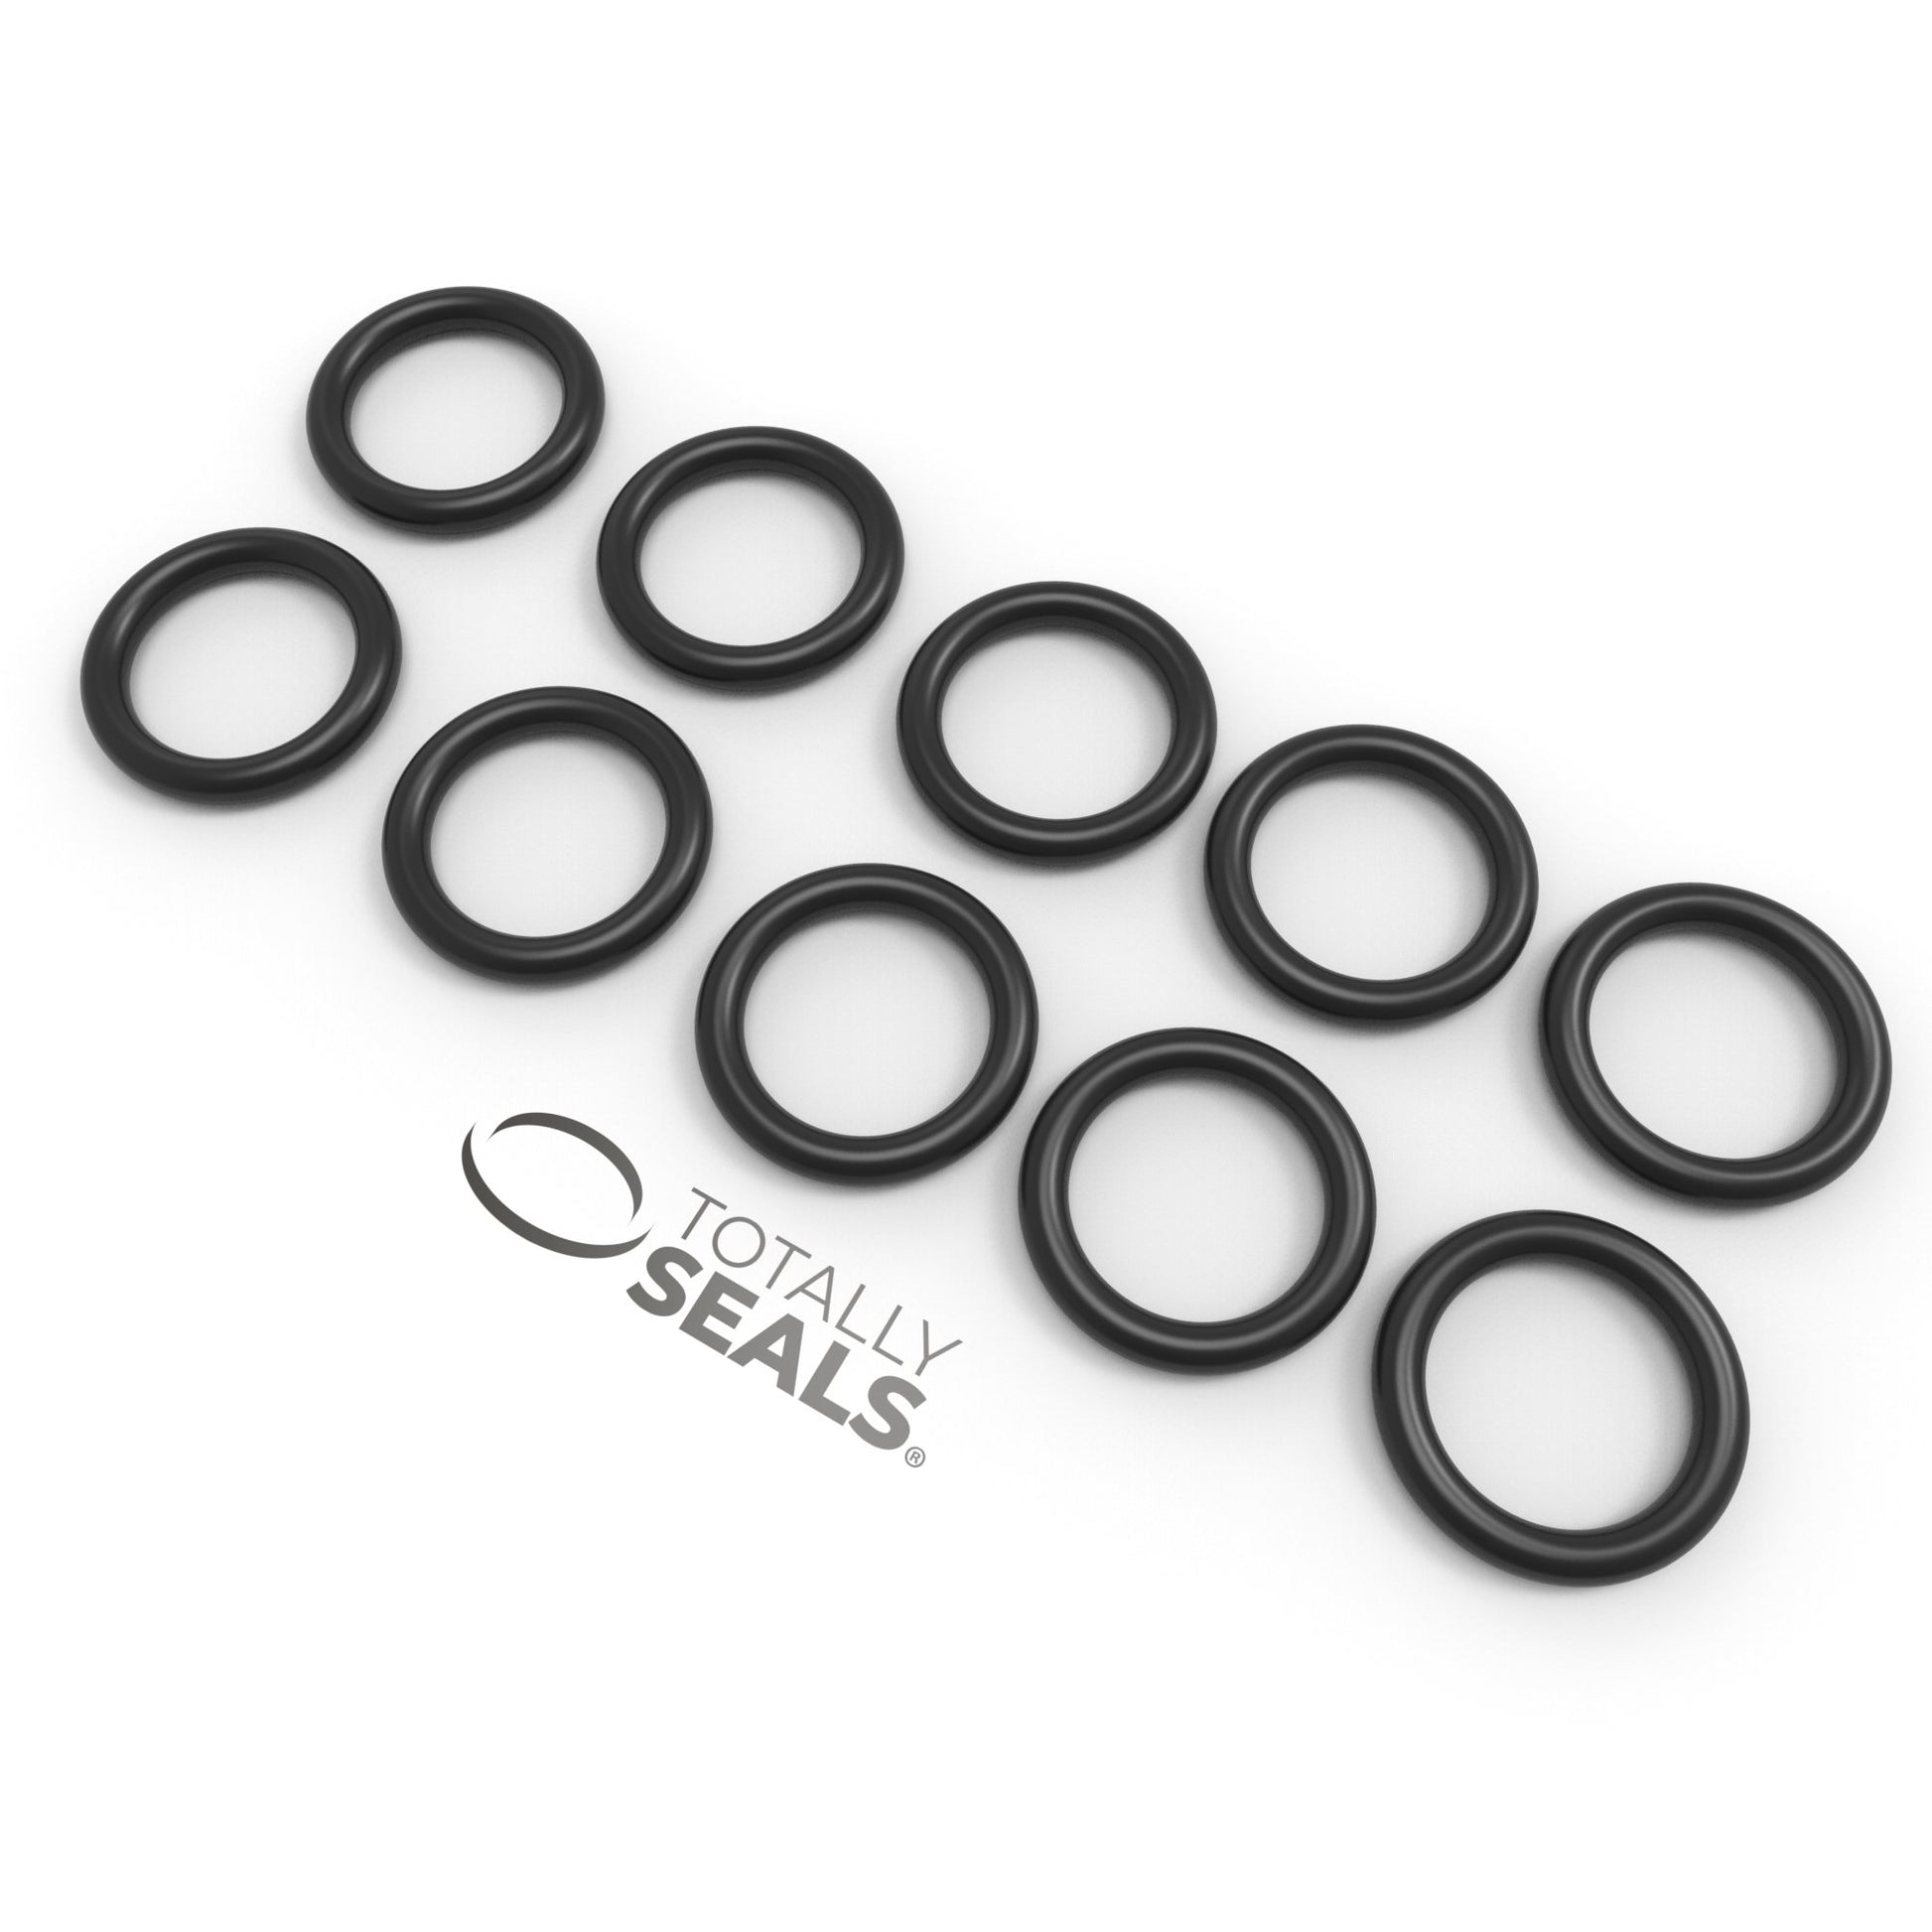 7/8" x 1/8" (BS212) Imperial Nitrile O-Rings - Totally Seals®